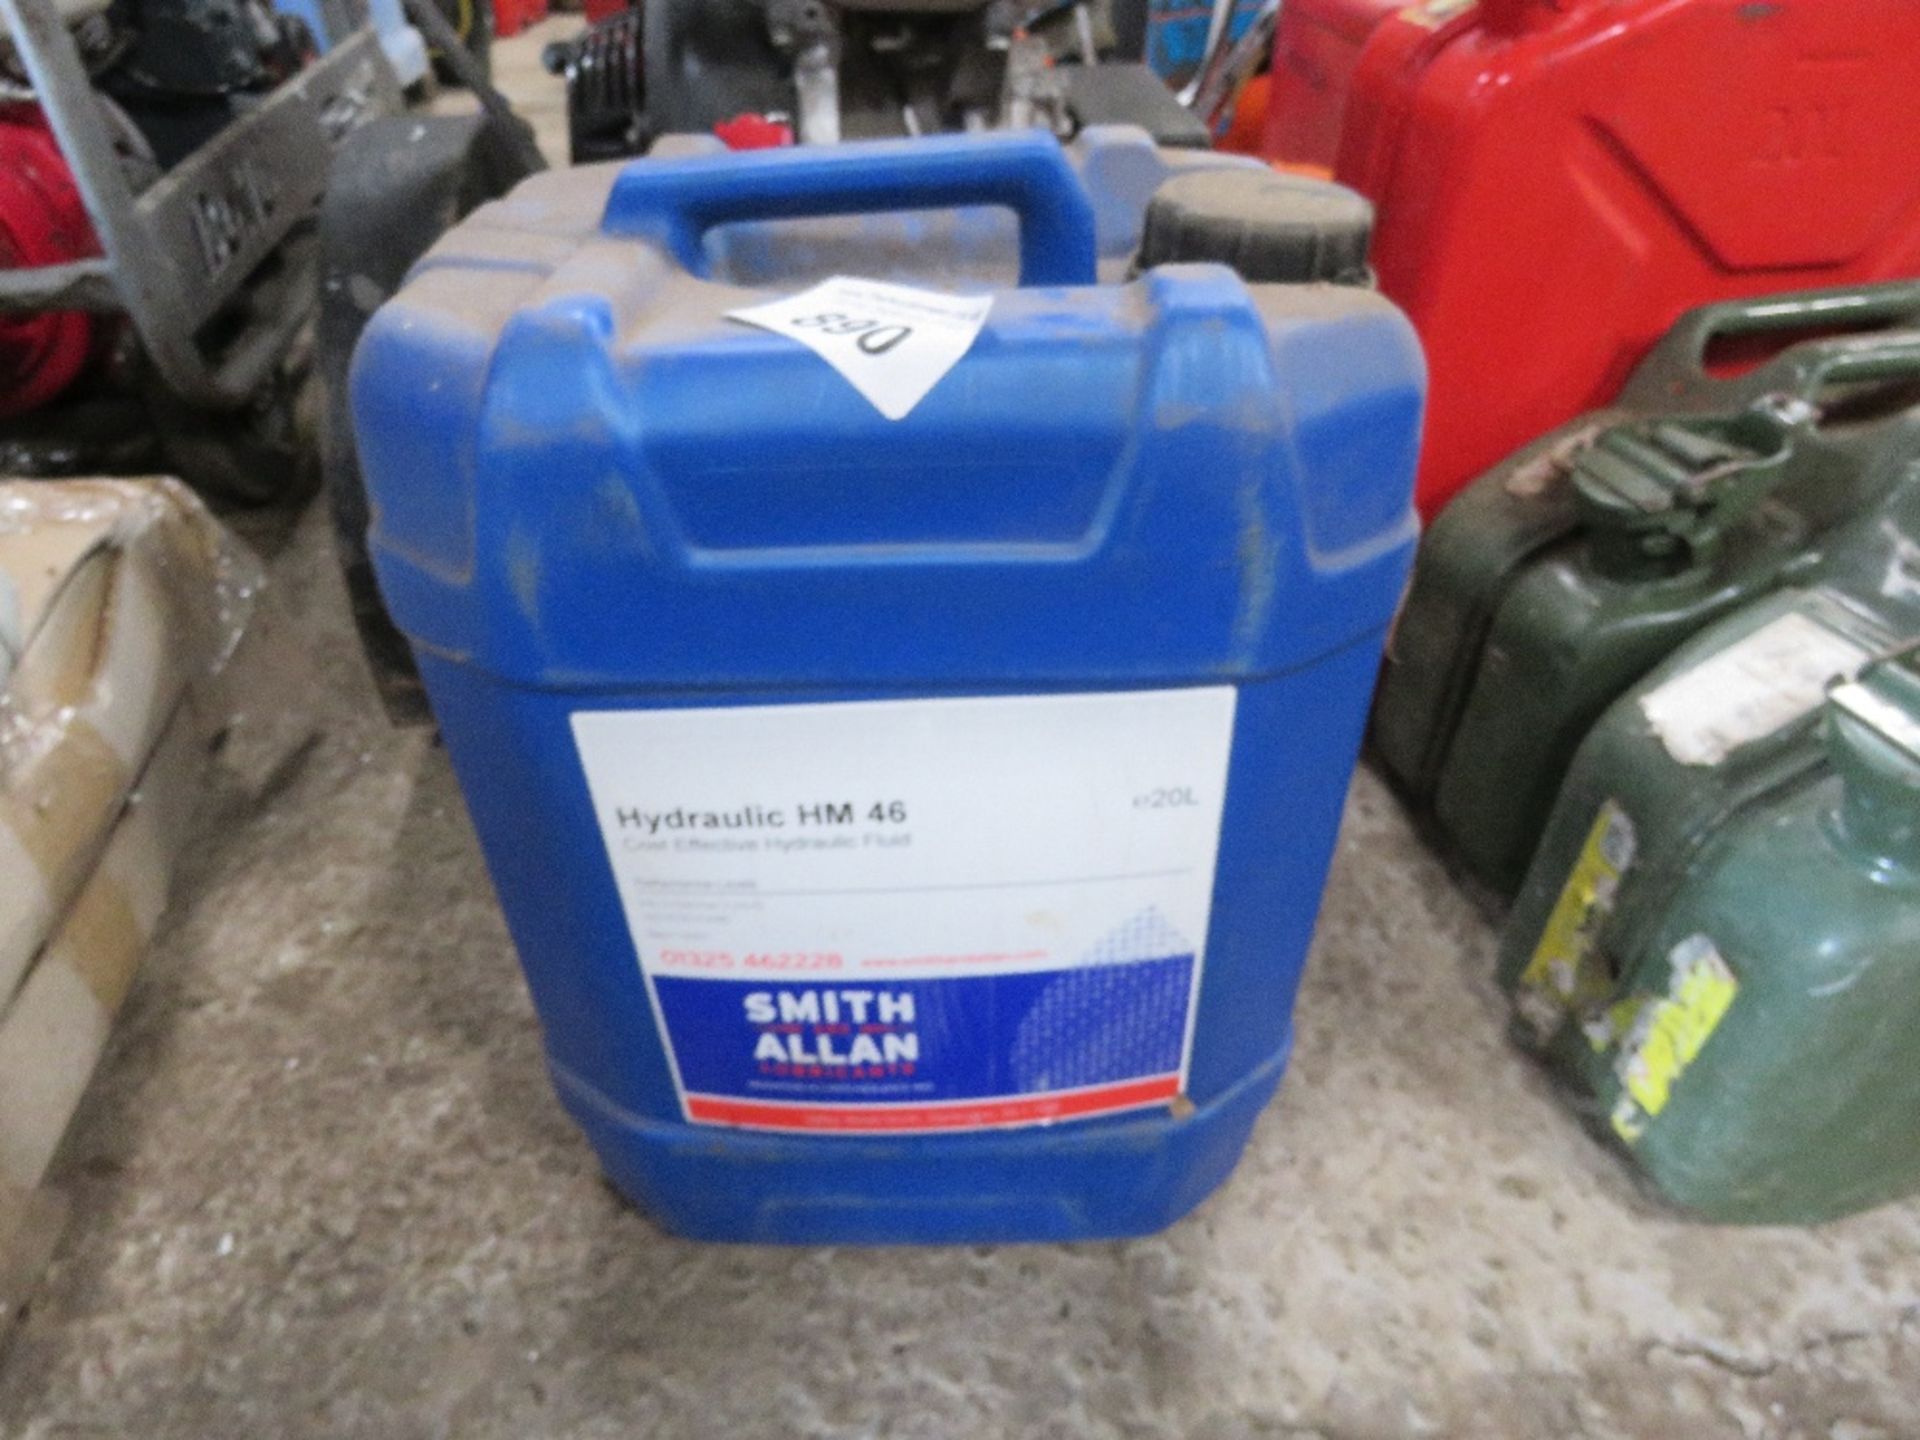 DRUM OF HM46 HYDRAULIC OIL. DIRECT FROM LANDSCAPE MAINTENANCE COMPANY DUE TO DEPOT CLOSURE.